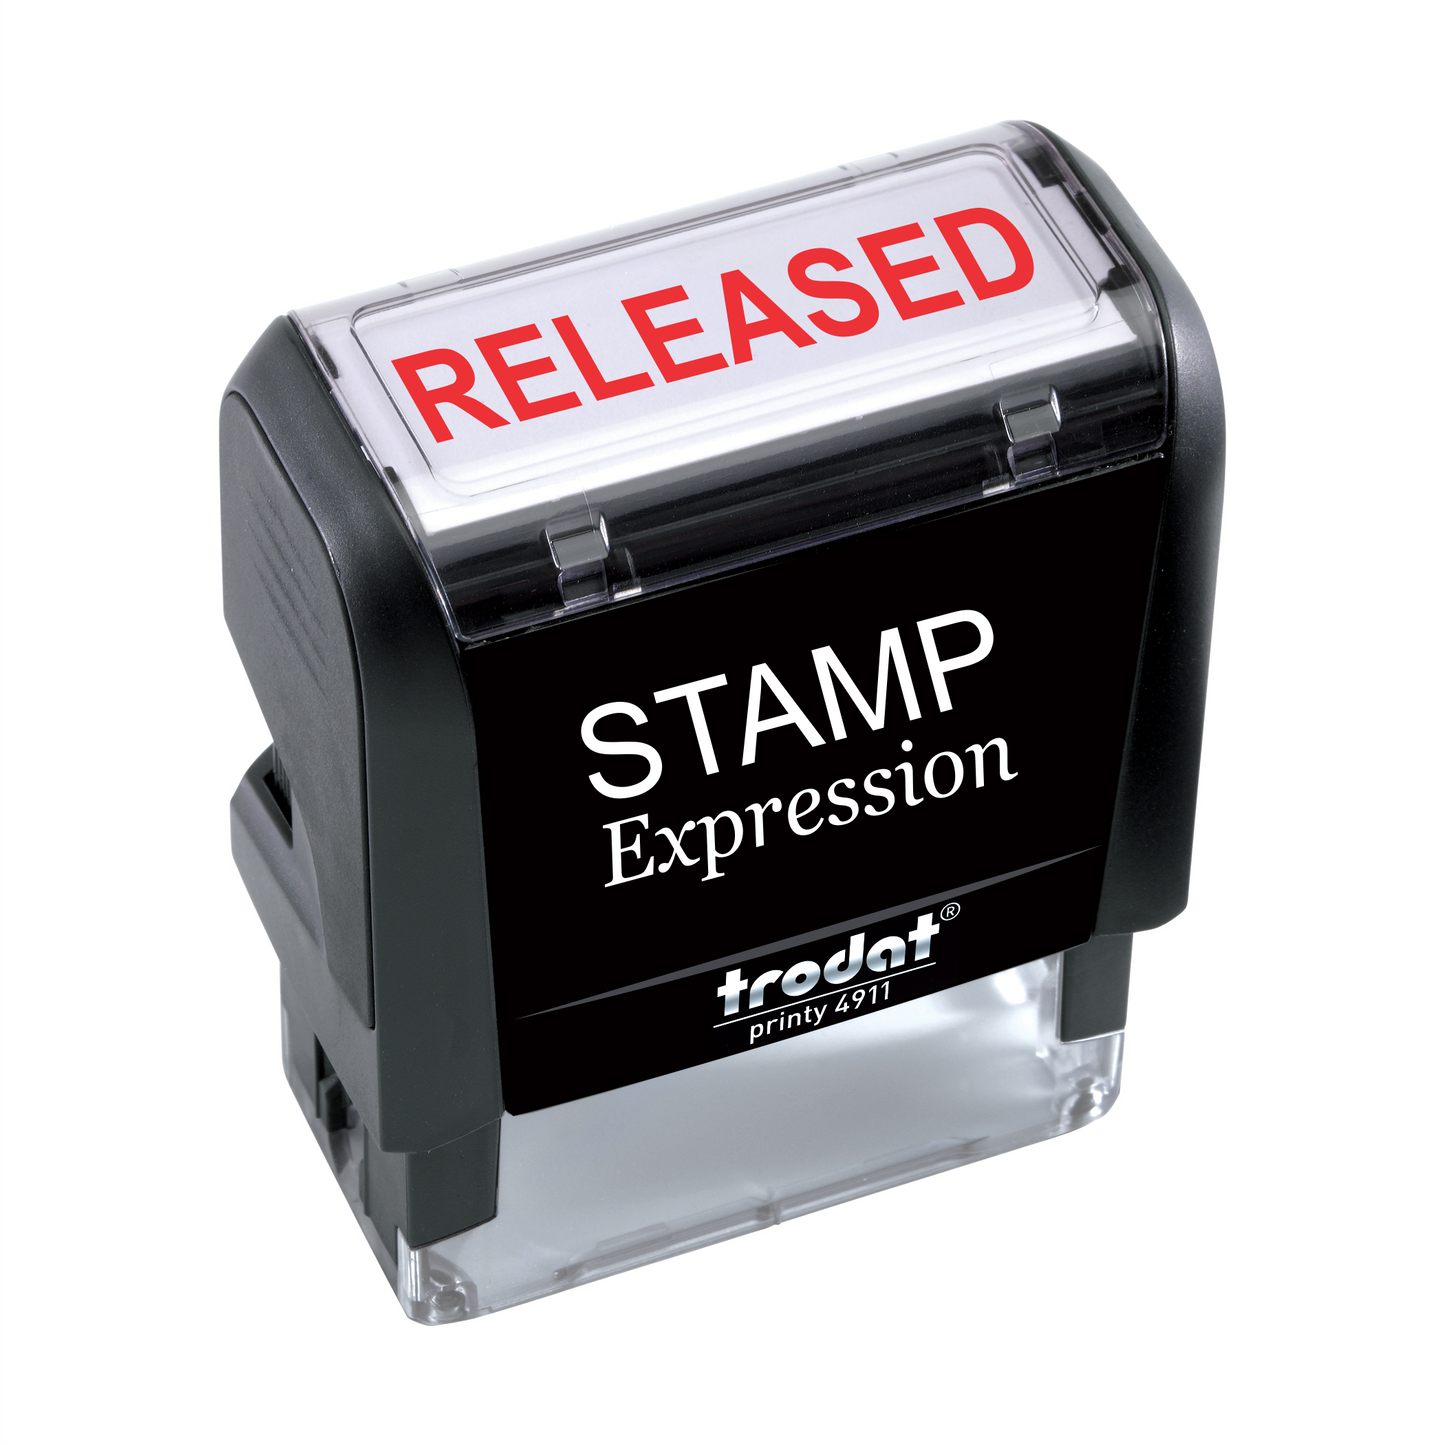 Released Office Self Inking Rubber Stamp (SH-5606)